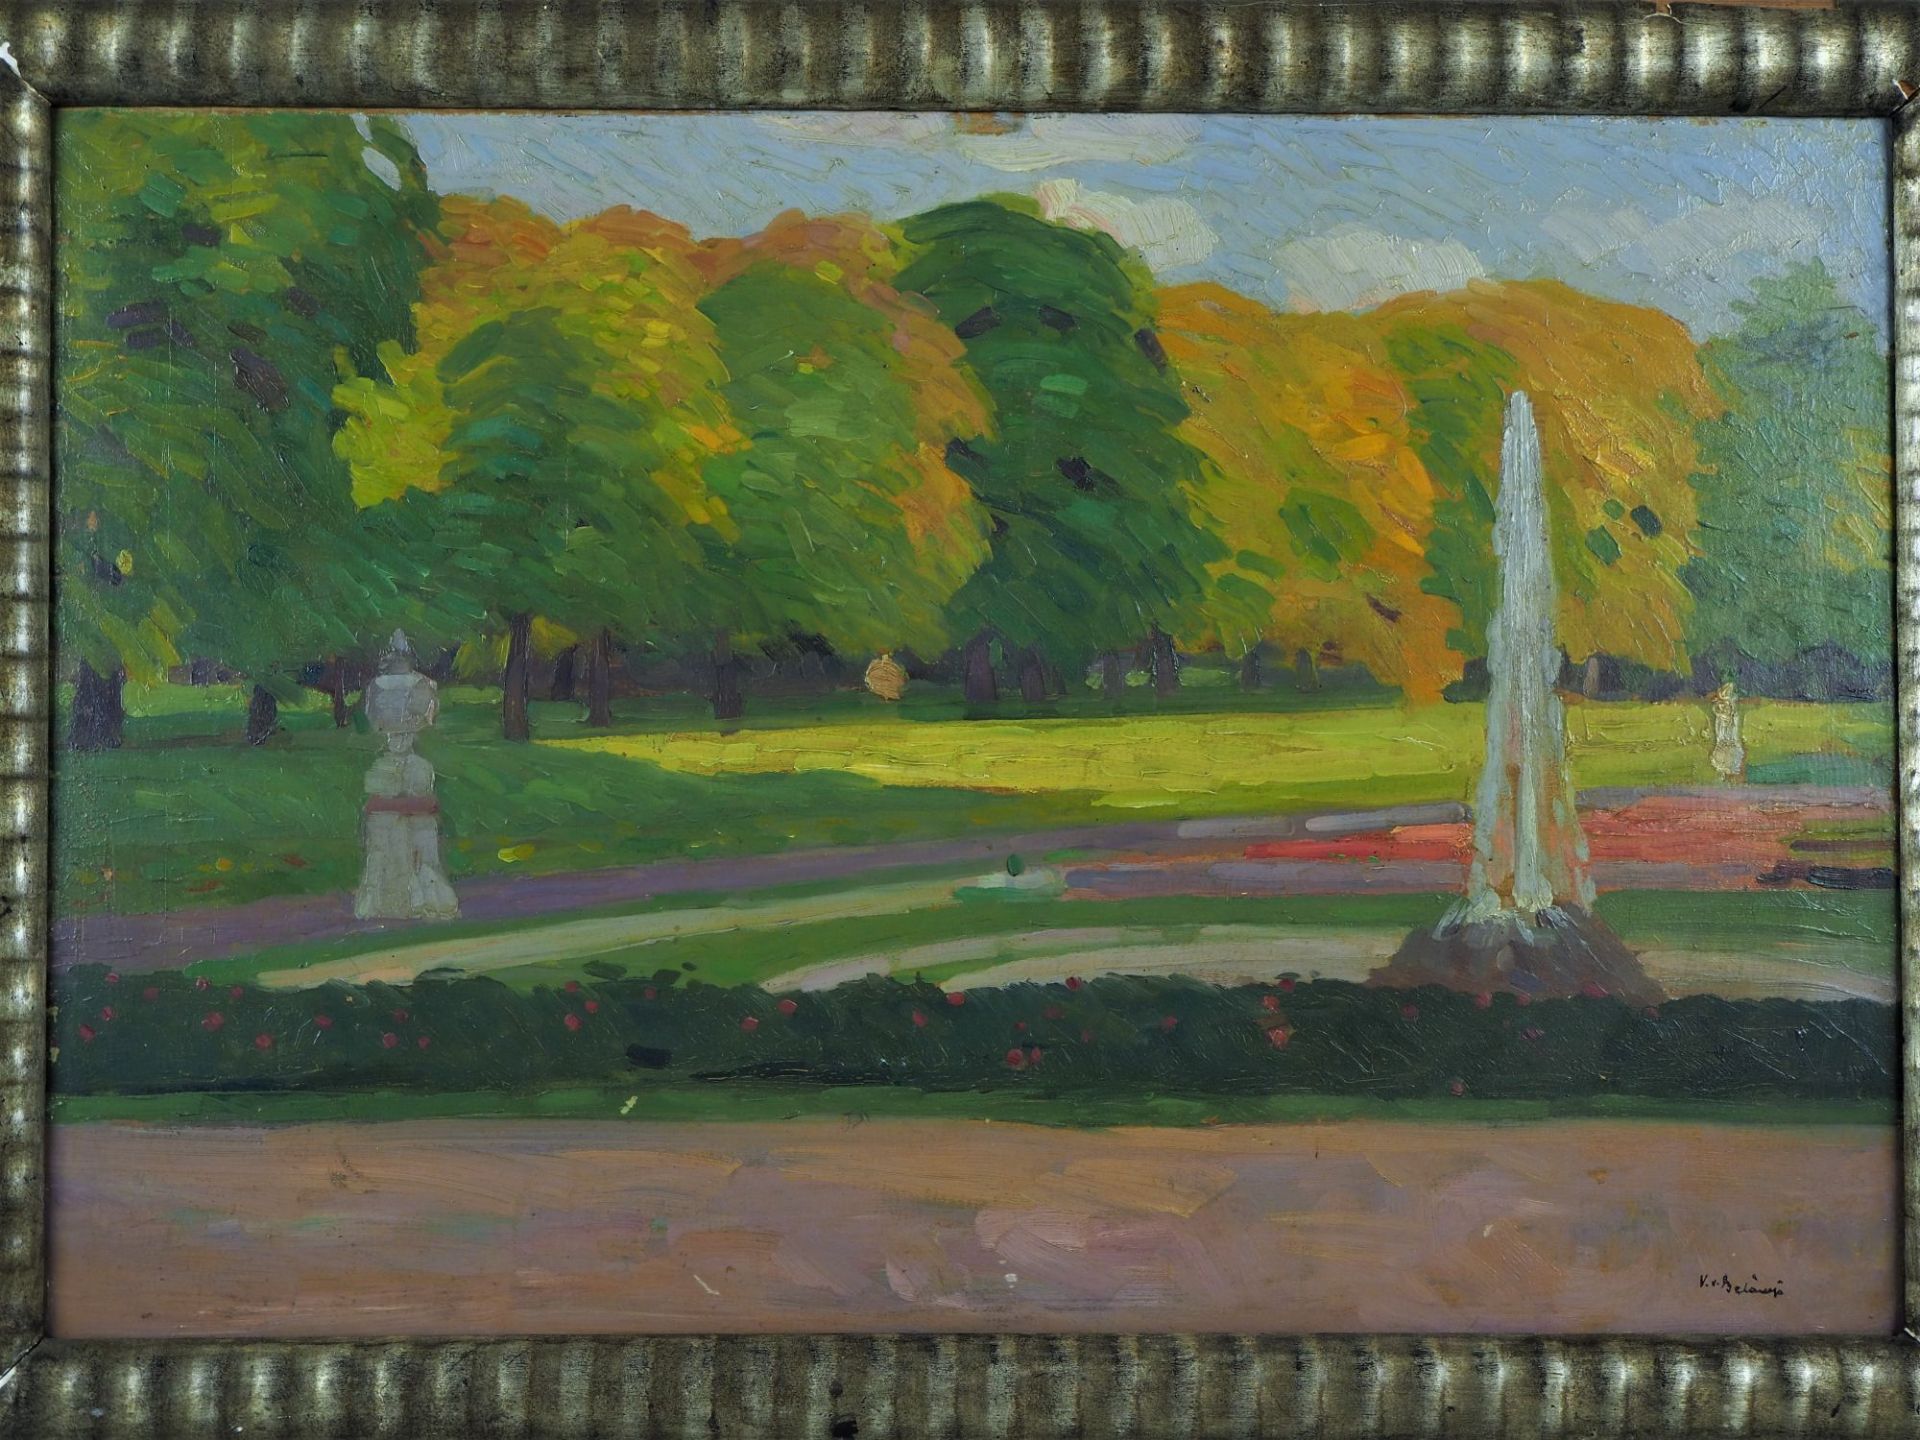 Impressionism Oil painting "Park Landscape", probably France around 1900. - Image 2 of 4